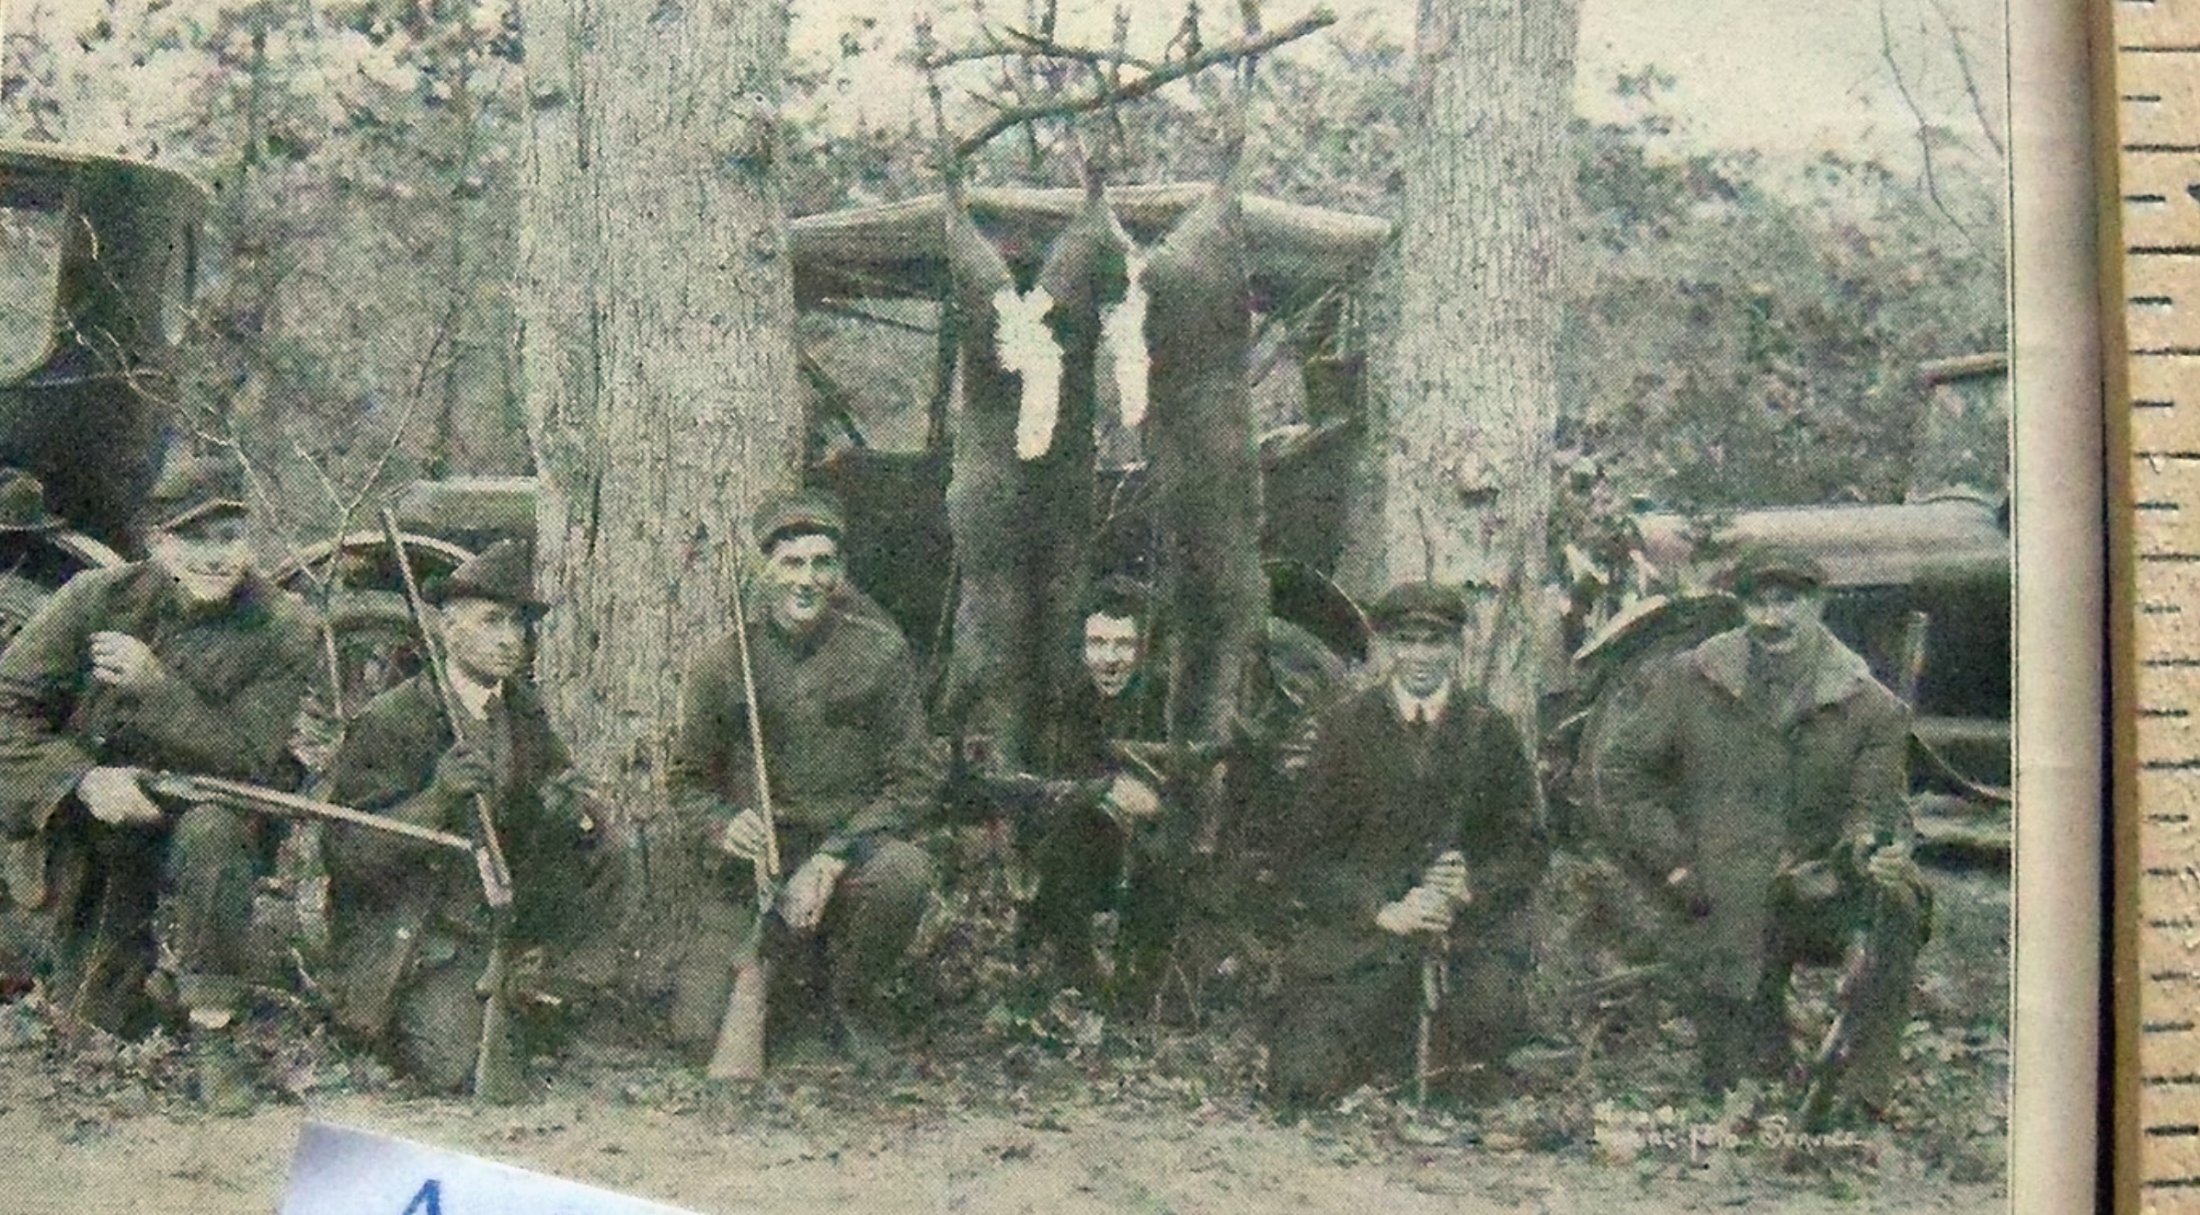 New Gretna Vicinity - or Port Republic - Hunting Party - 1921